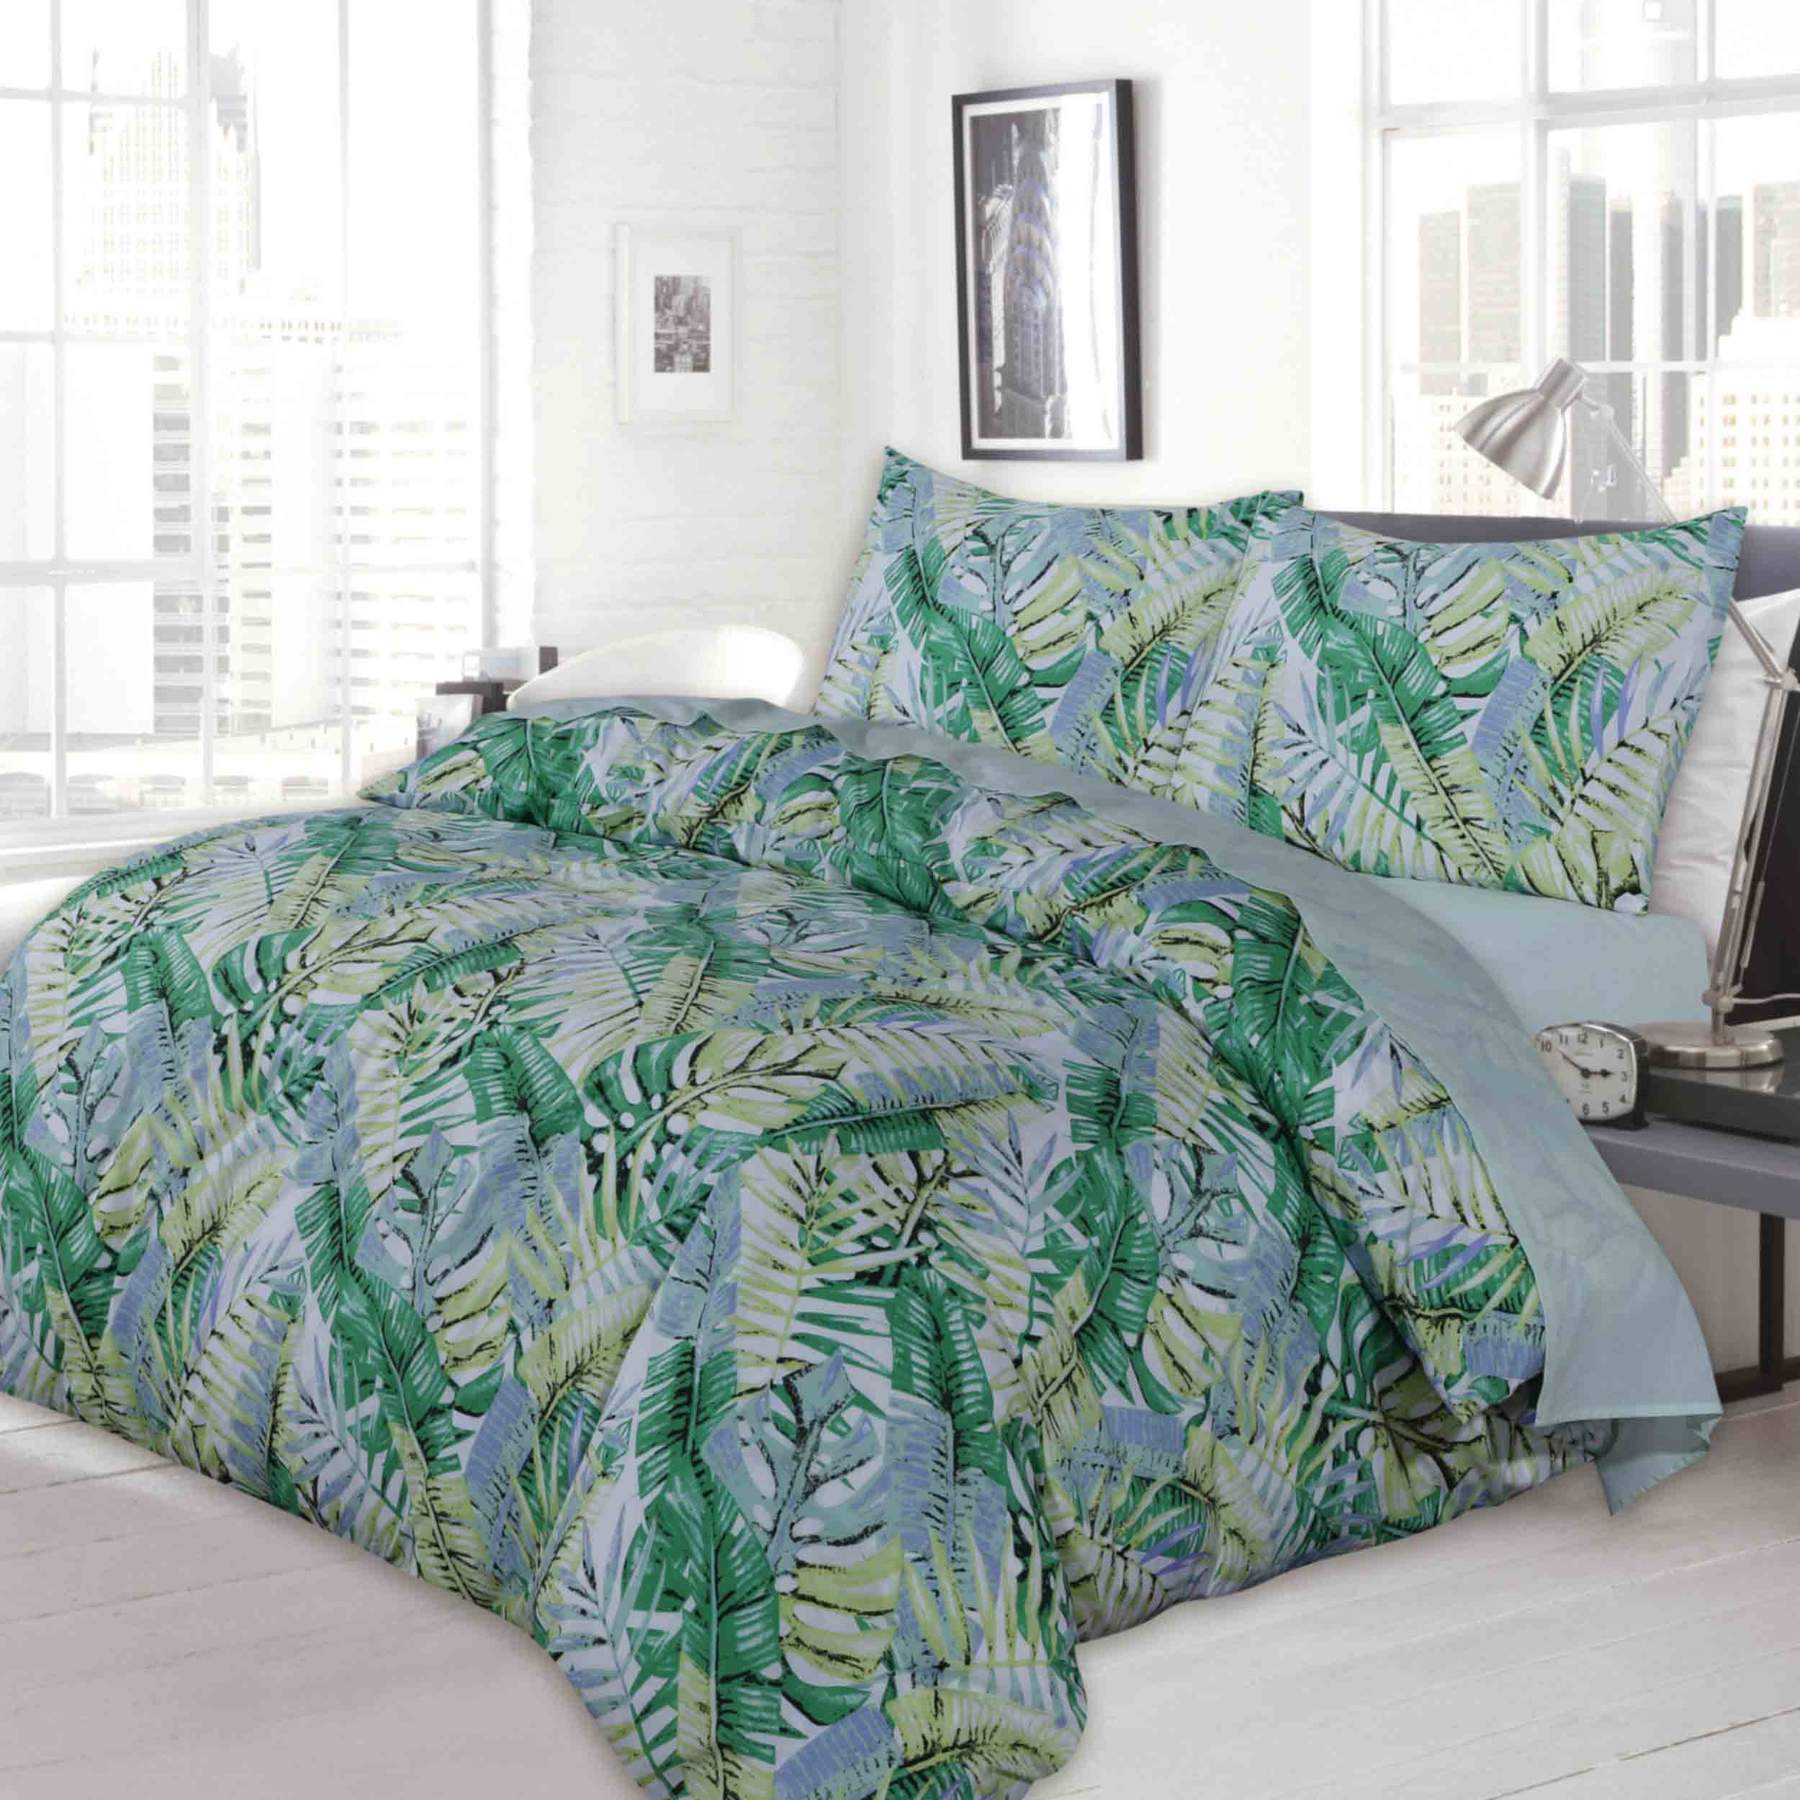 Sedum Leaf Comforter with Pillow Covers